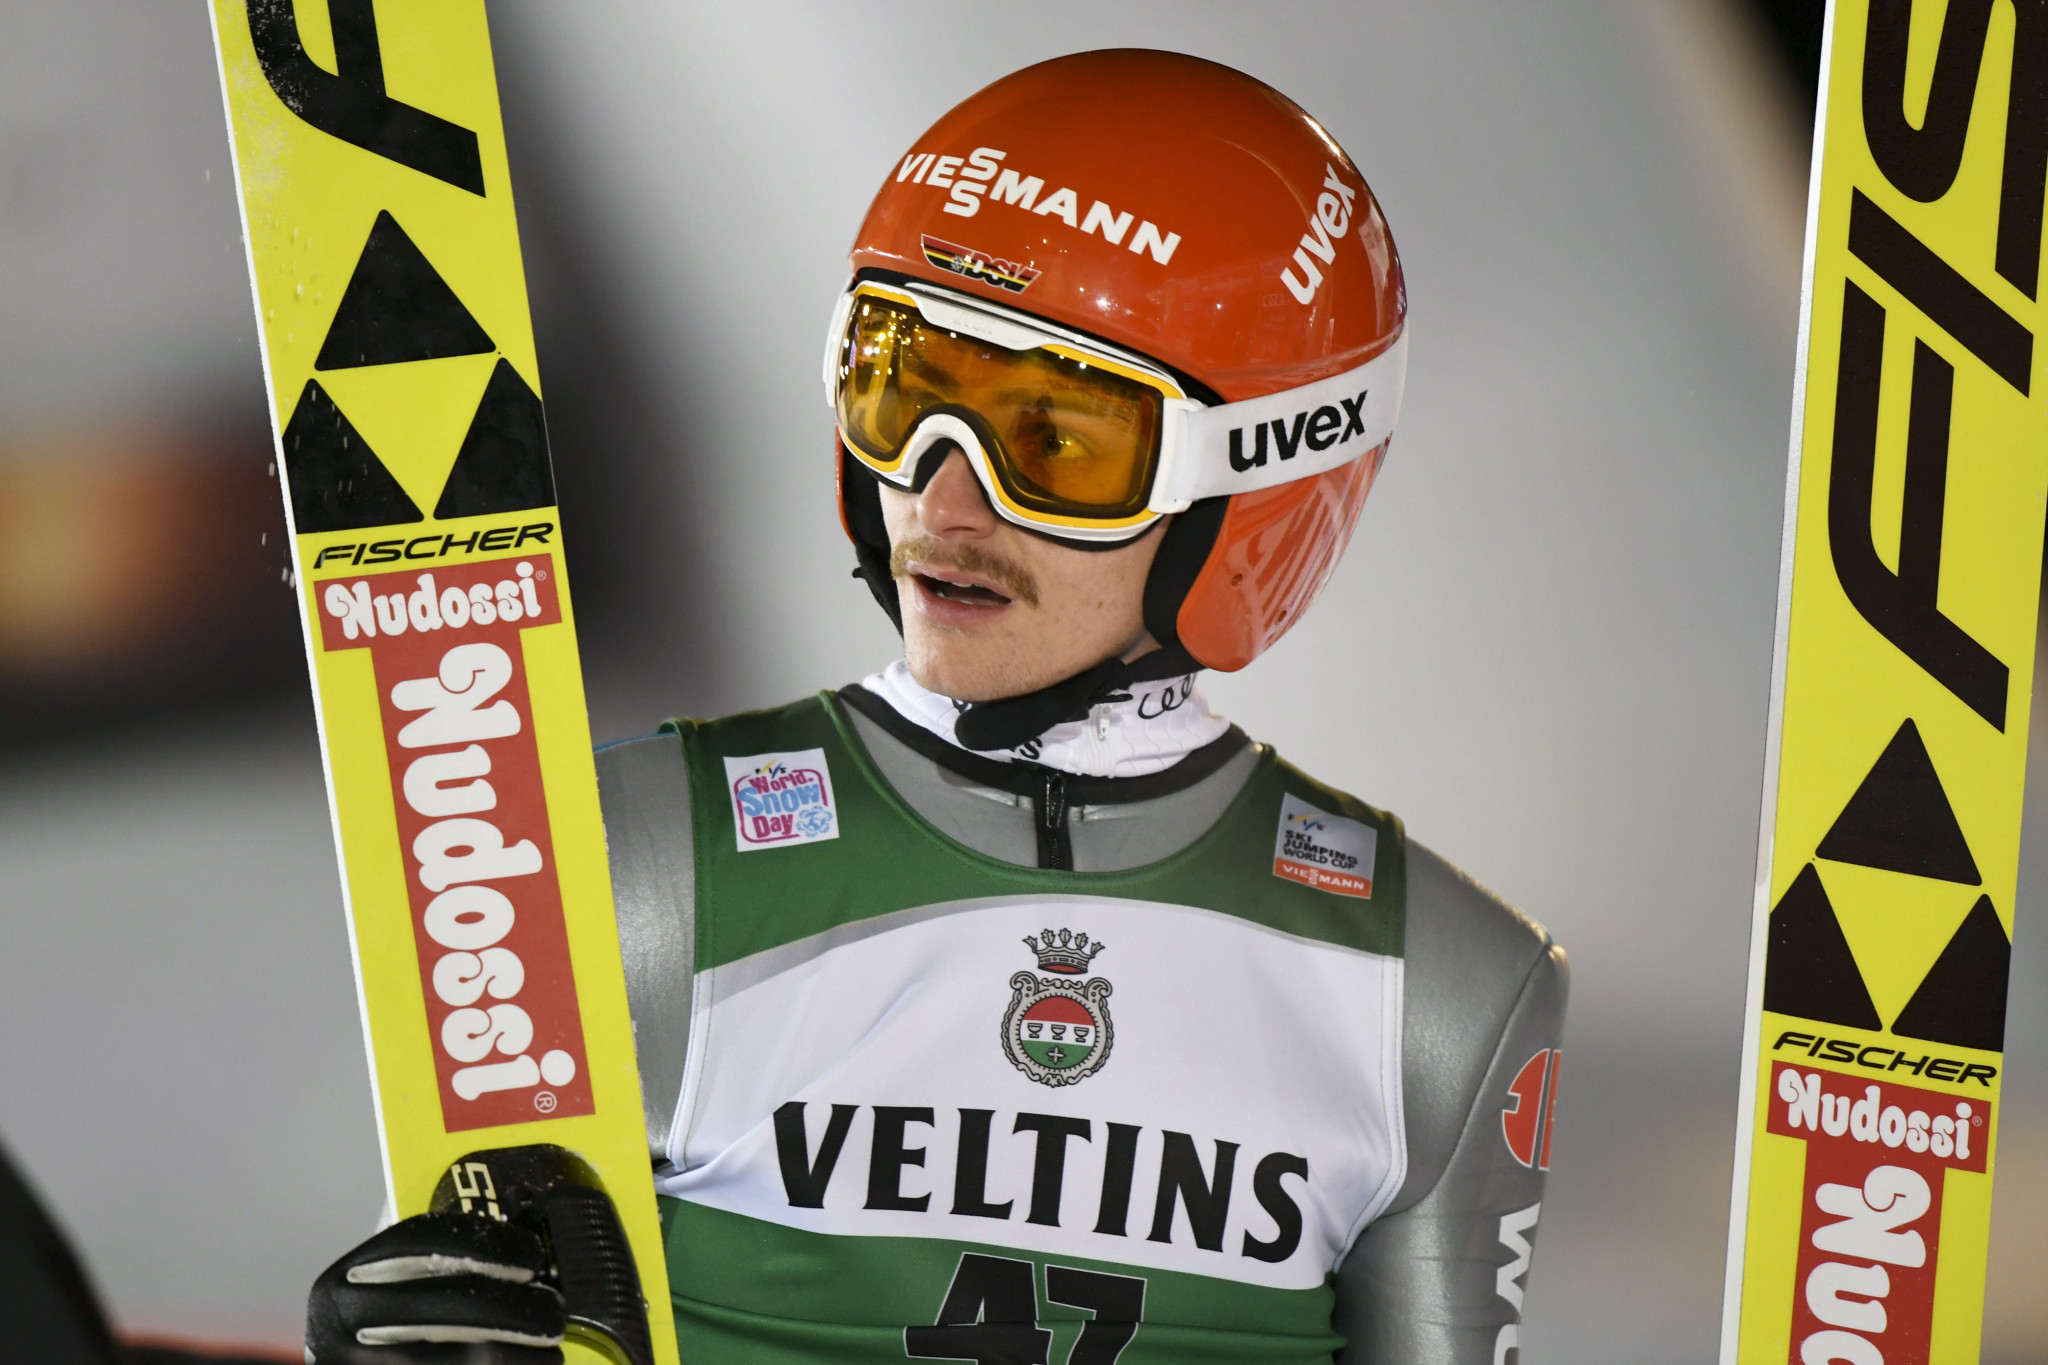 Germany bid to extend strong start to season on home hill at Ski Jumping World Cup